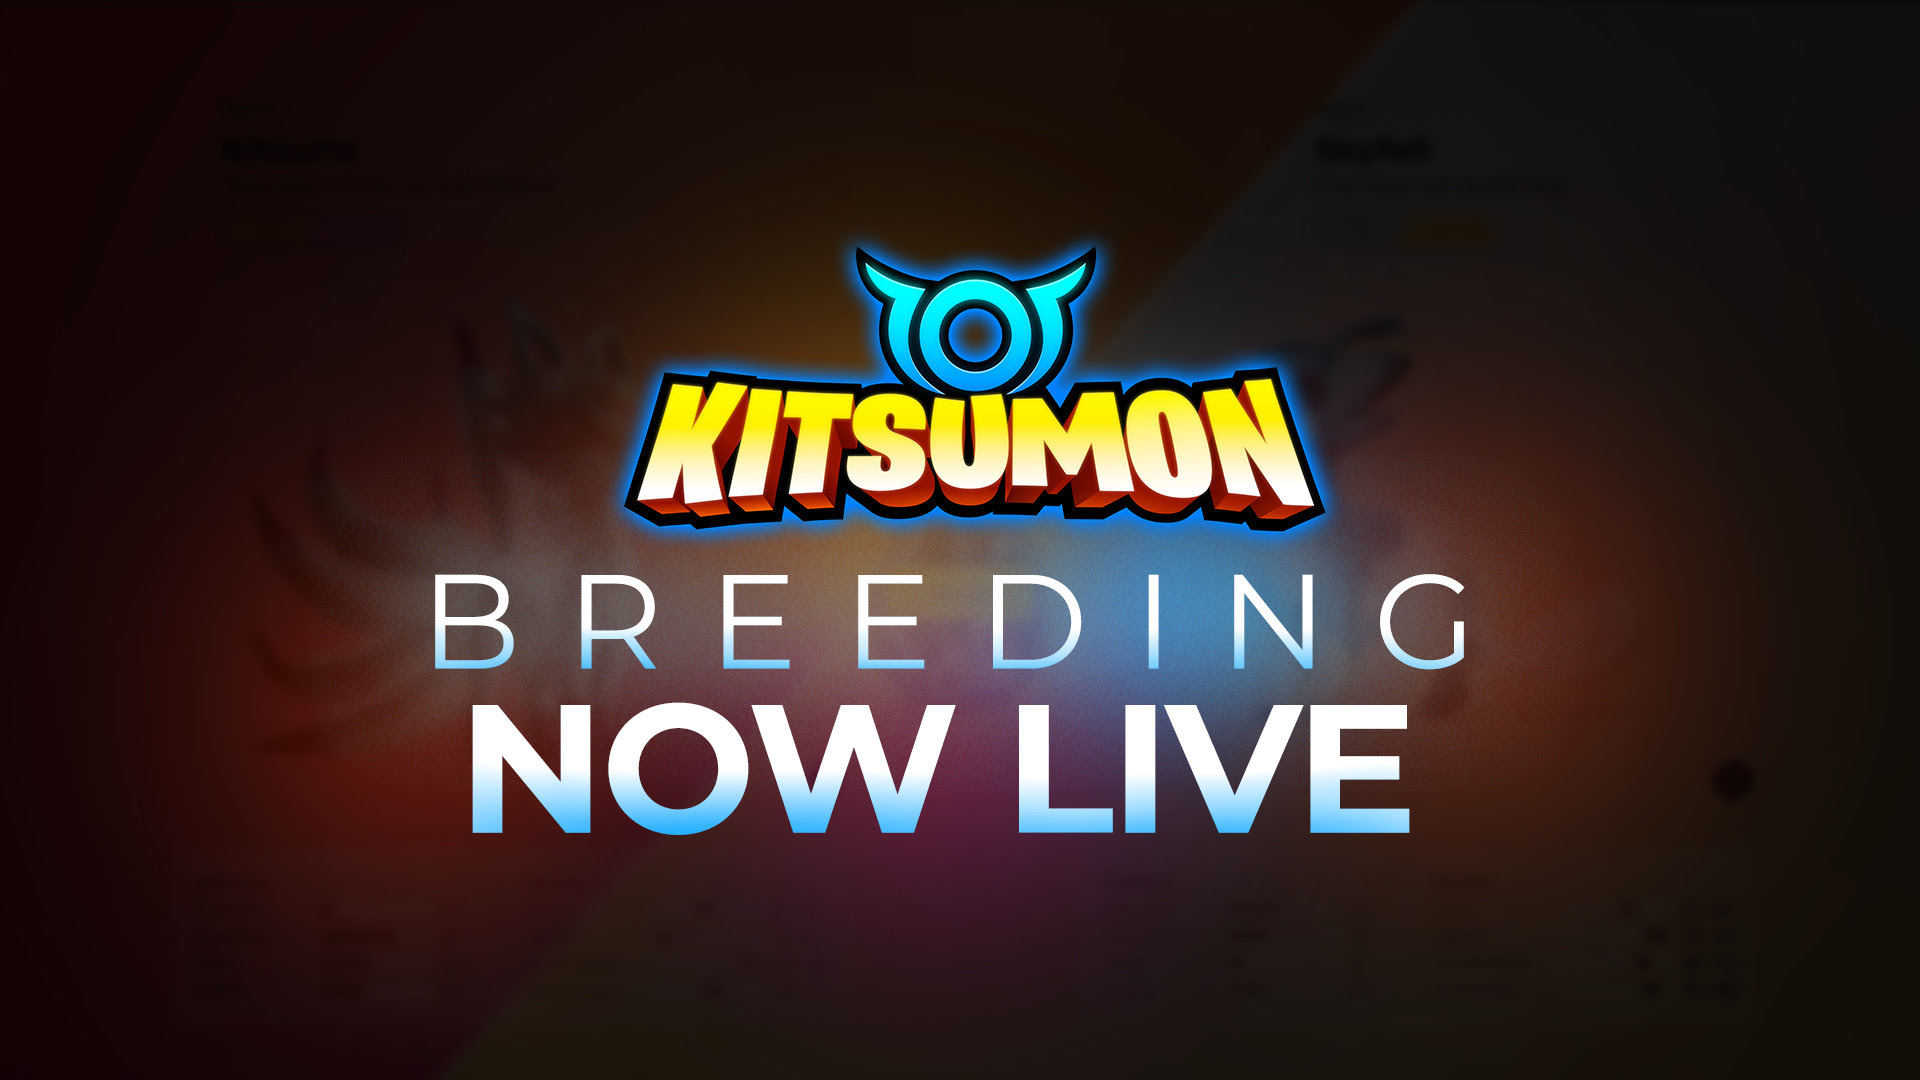 Kitsumon Allows Users To Create Unique NFTs Through Its Newly Launched NFT Breeding Gameplay